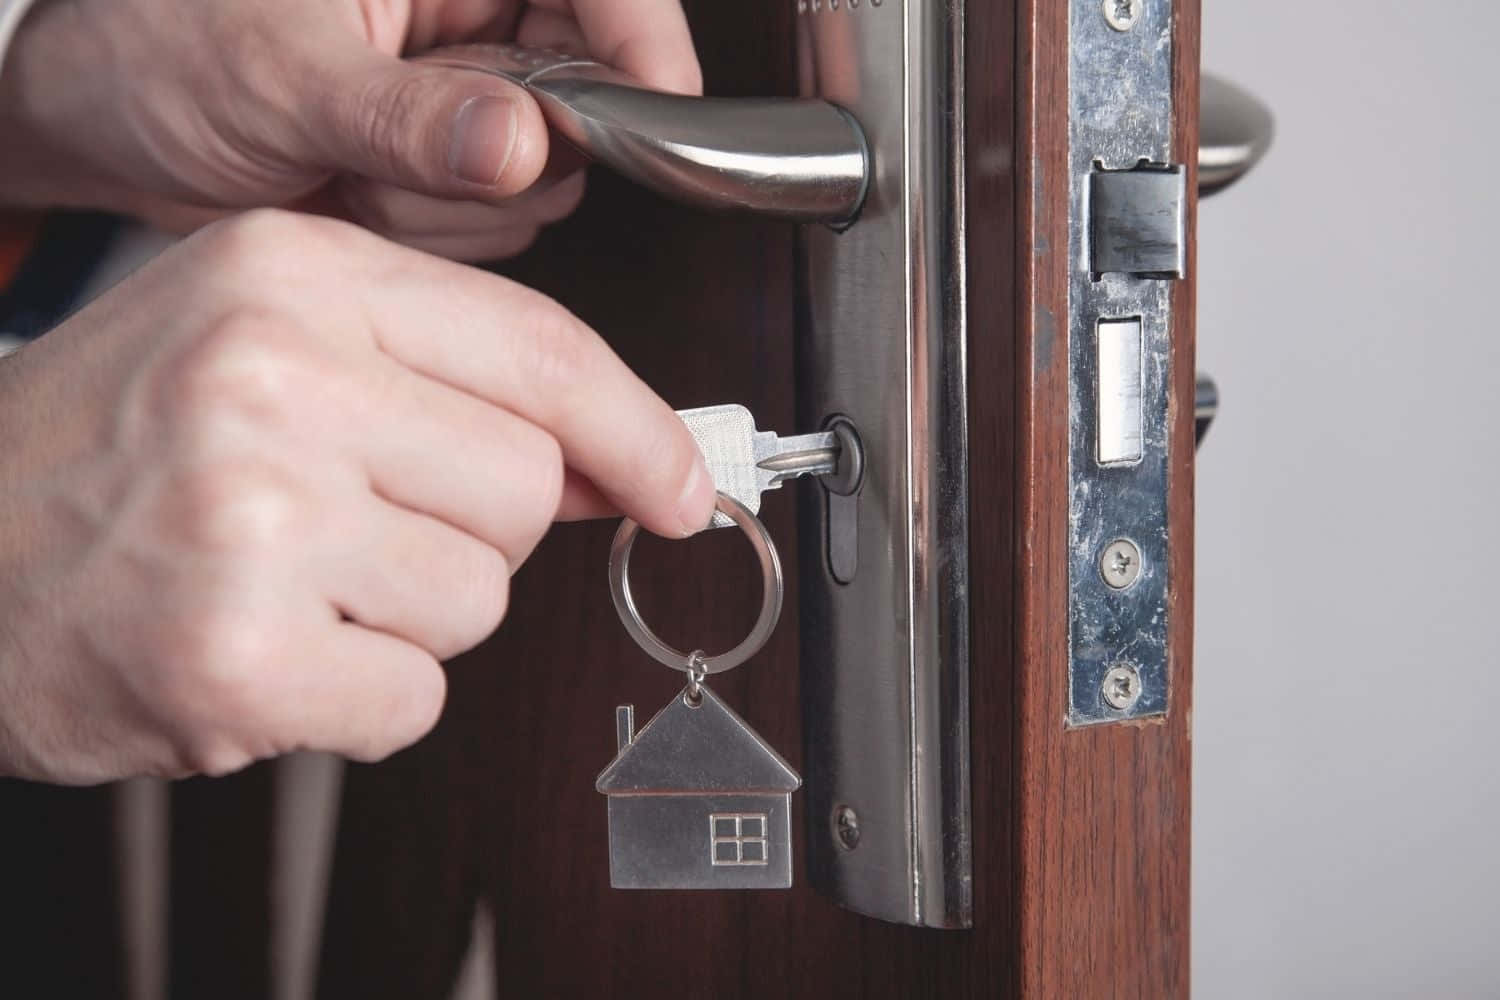 Guard your things from intruders with fradulent locks